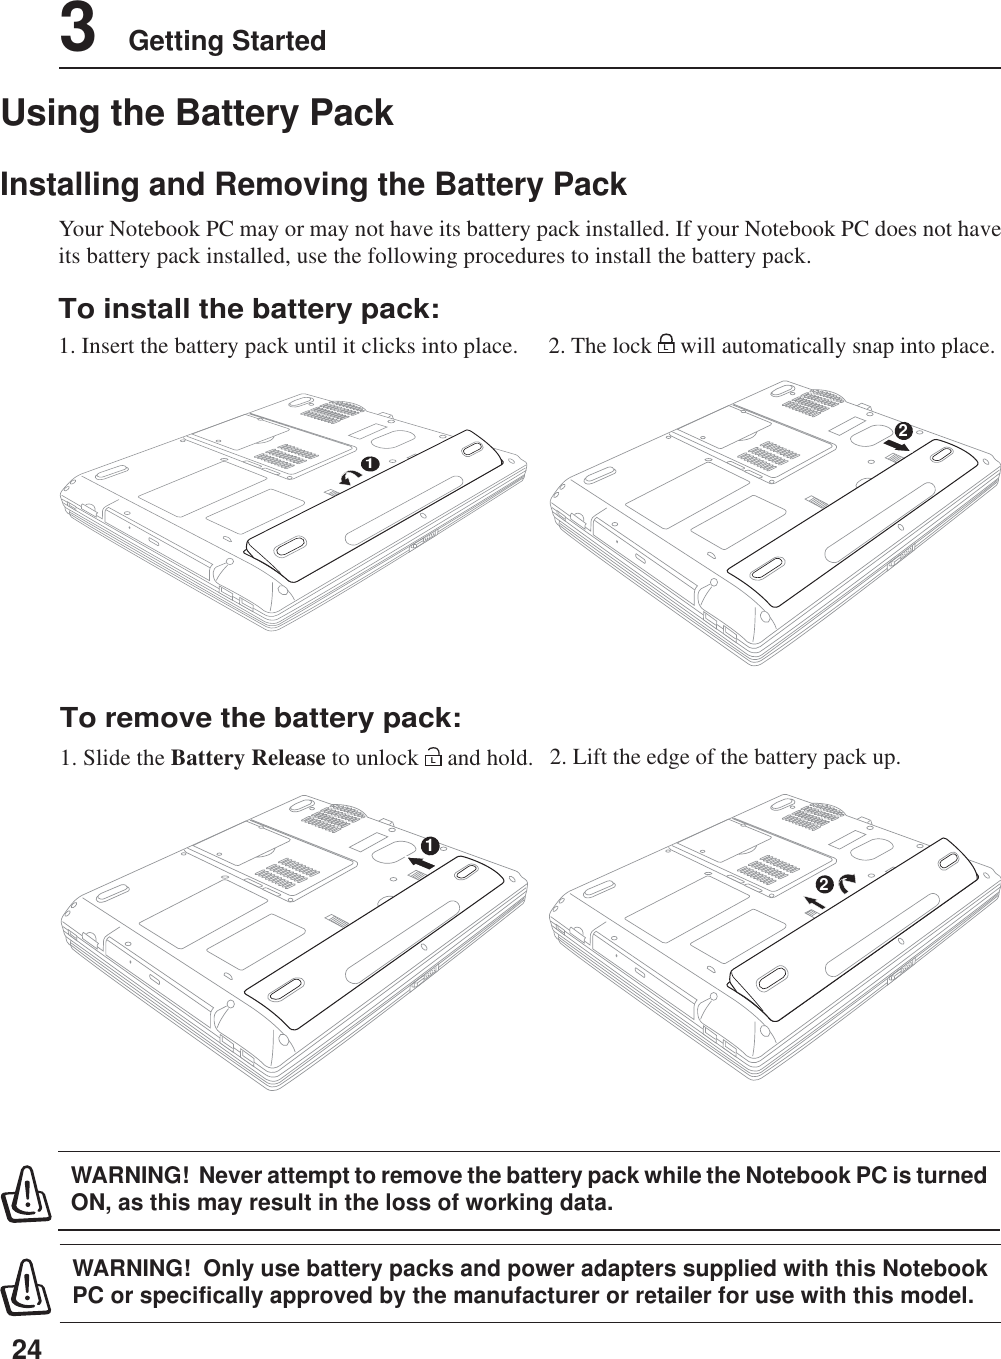 243    Getting StartedUsing the Battery PackInstalling and Removing the Battery PackYour Notebook PC may or may not have its battery pack installed. If your Notebook PC does not haveits battery pack installed, use the following procedures to install the battery pack.WARNING!  Only use battery packs and power adapters supplied with this NotebookPC or specifically approved by the manufacturer or retailer for use with this model.WARNING!  Never attempt to remove the battery pack while the Notebook PC is turnedON, as this may result in the loss of working data.To install the battery pack:1. Insert the battery pack until it clicks into place.To remove the battery pack:1. Slide the Battery Release to unlock L and hold. 2. Lift the edge of the battery pack up.2. The lock L will automatically snap into place.1212